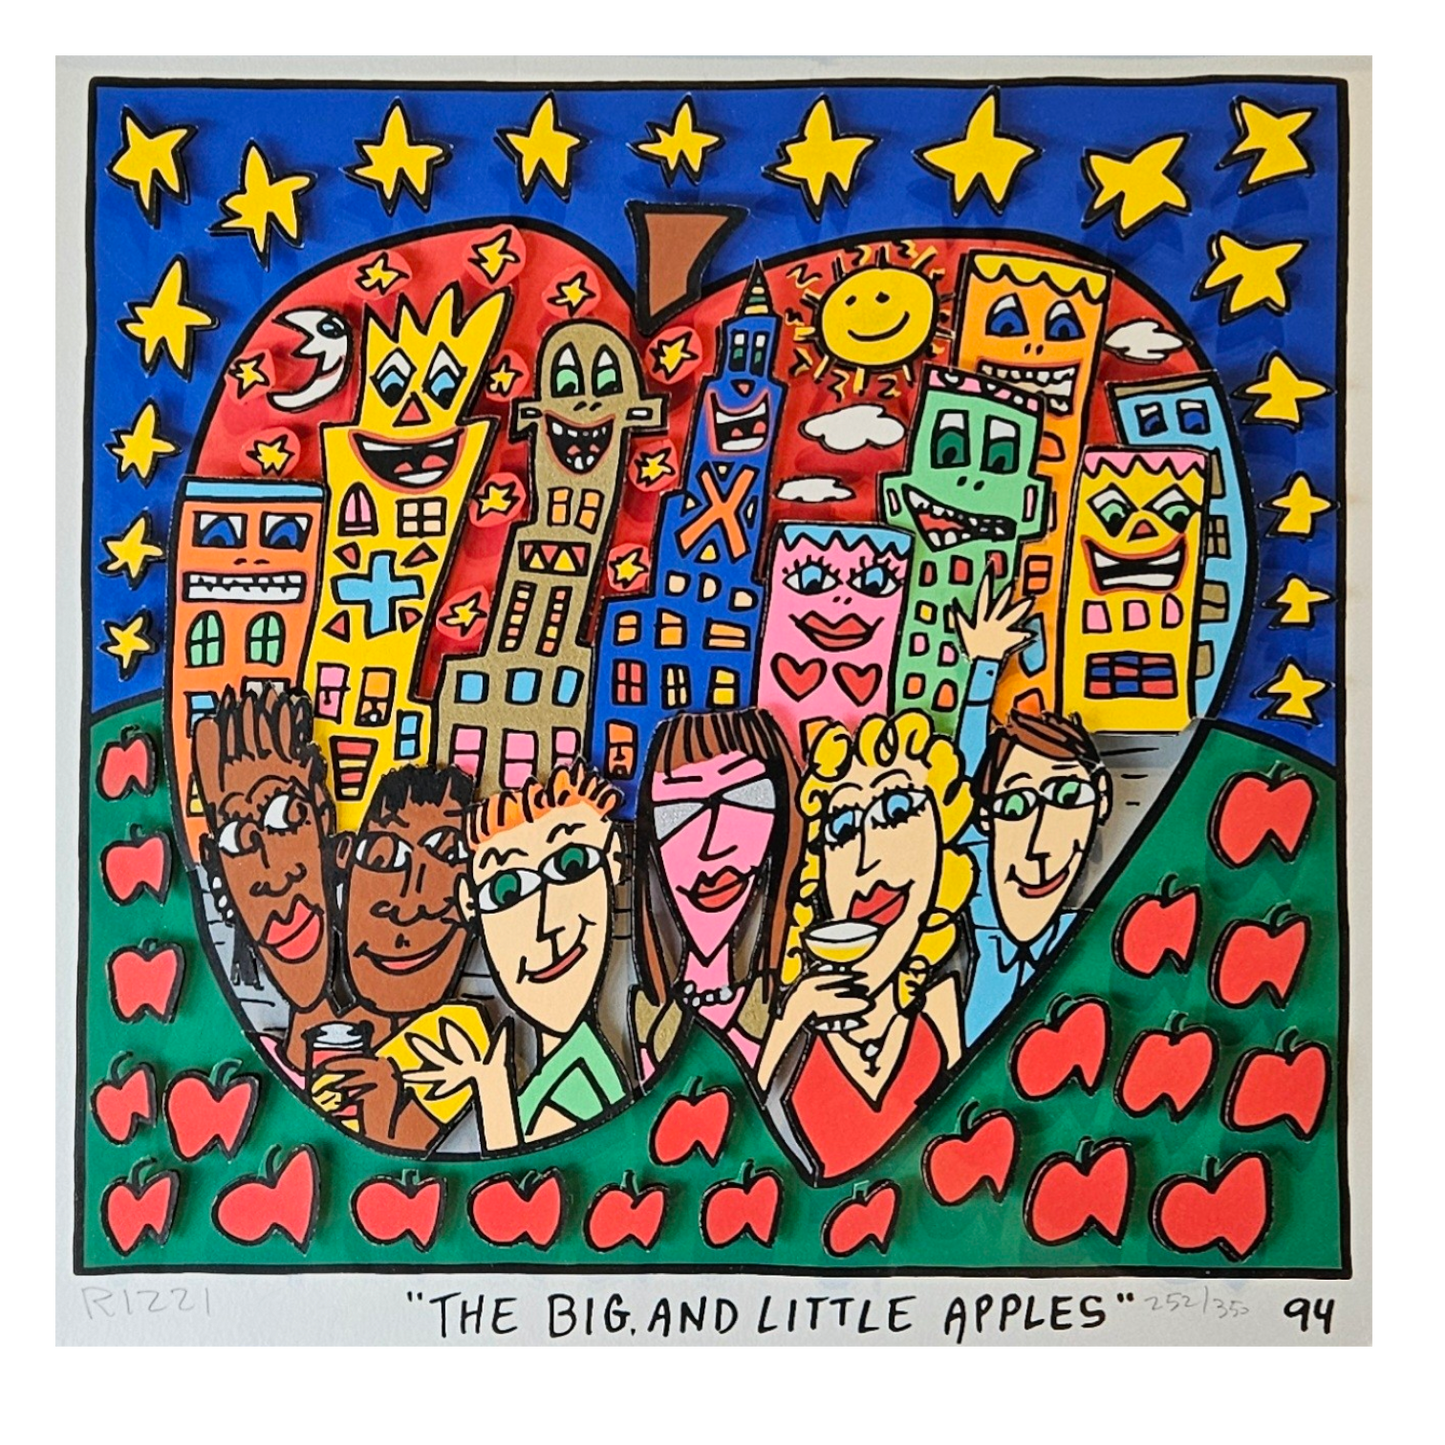 James Rizzi - The Big and Little Apples (1994)